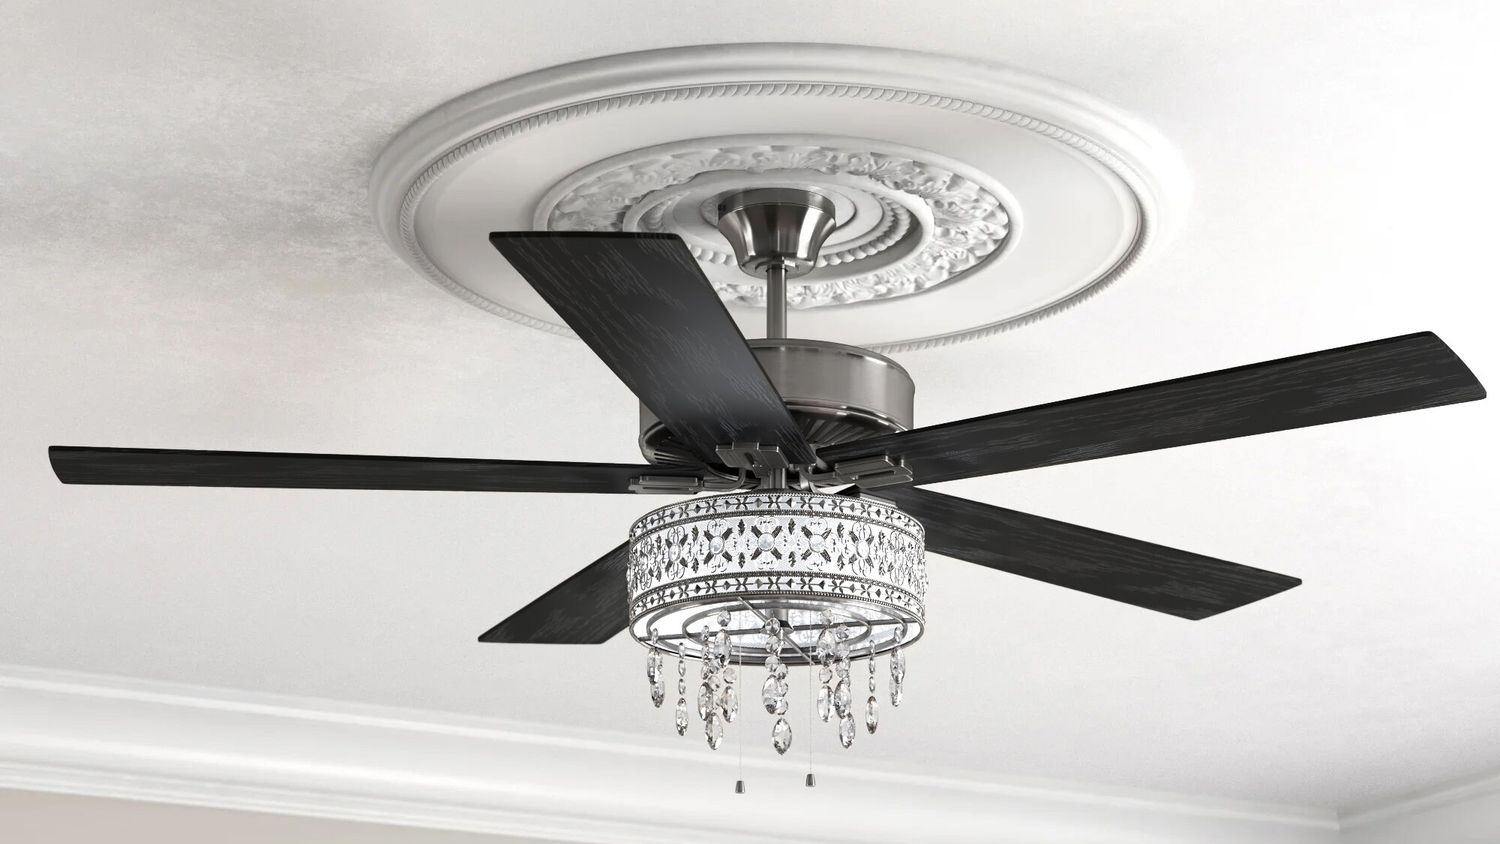 The 10 Best Ceiling Fans In 2021 According To Reviews Real Simple - Best 60 Inch Ceiling Fan With Light